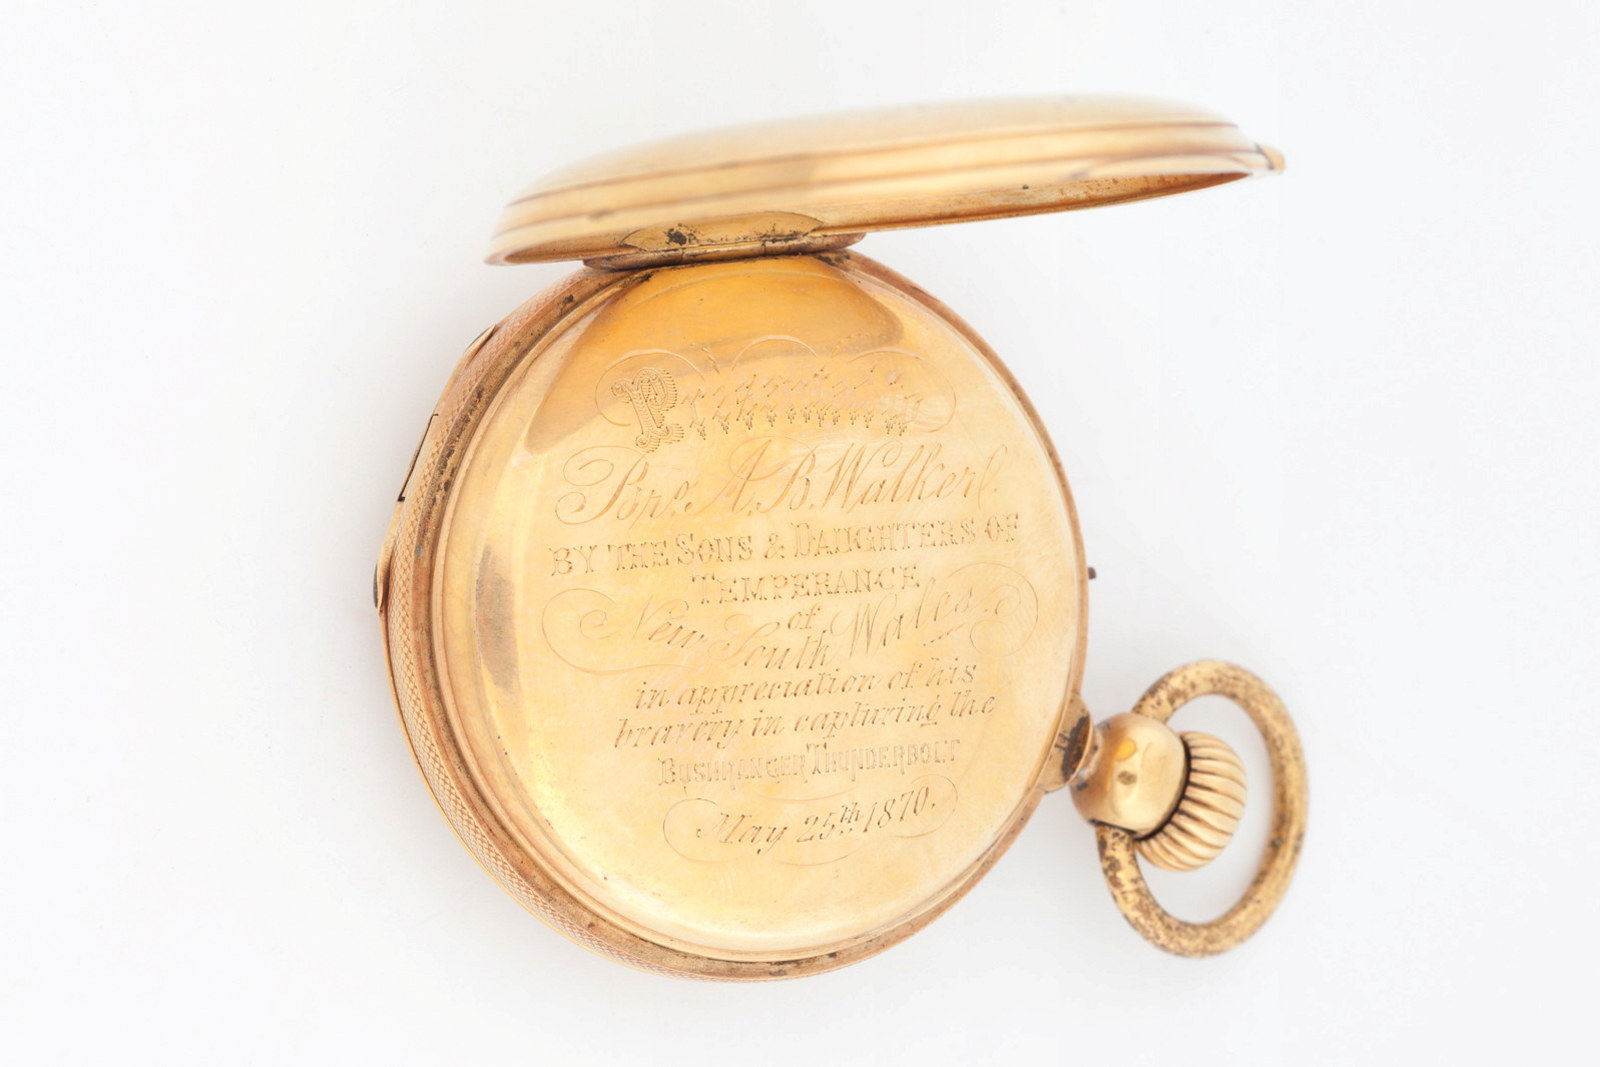 Pocket watch presented to Constable Alexander Walker by the Sons and Daughters of Temperance, 1870